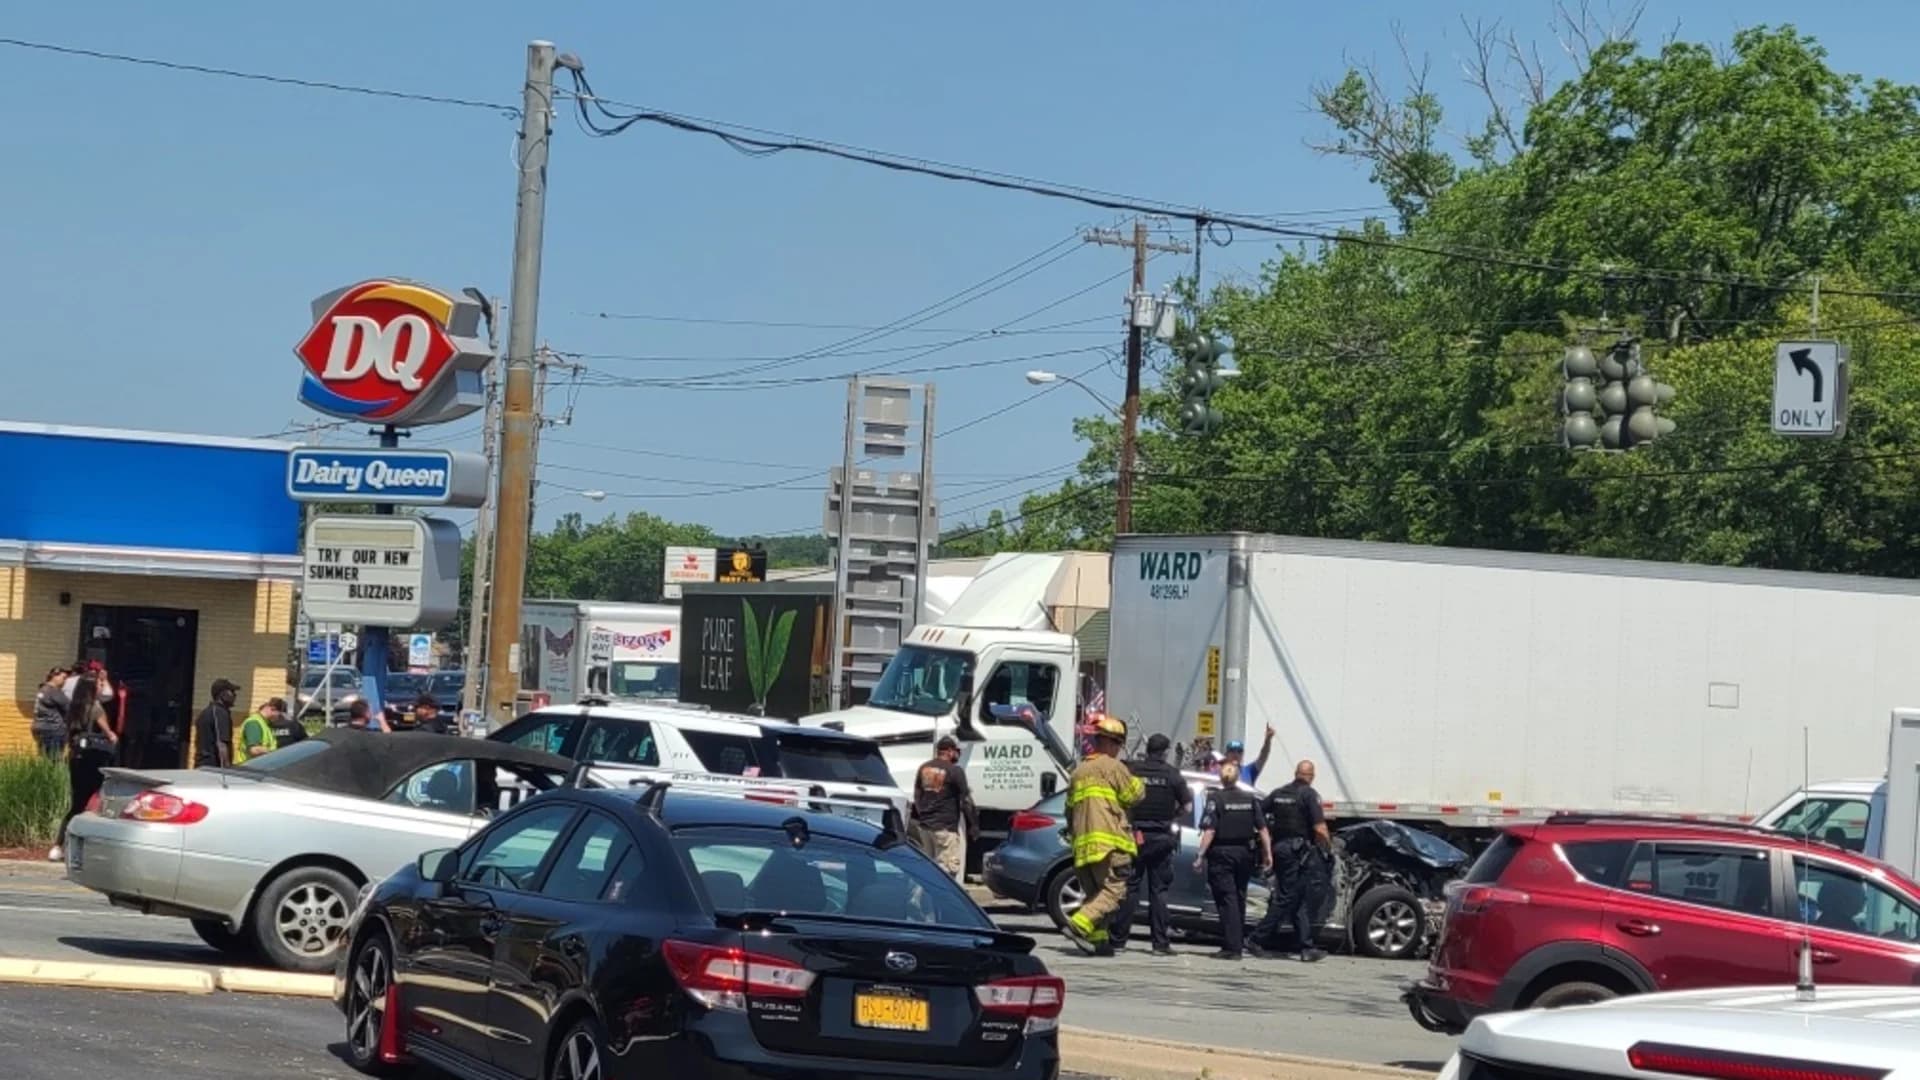 New Windsor woman injured in crash with tractor-trailer